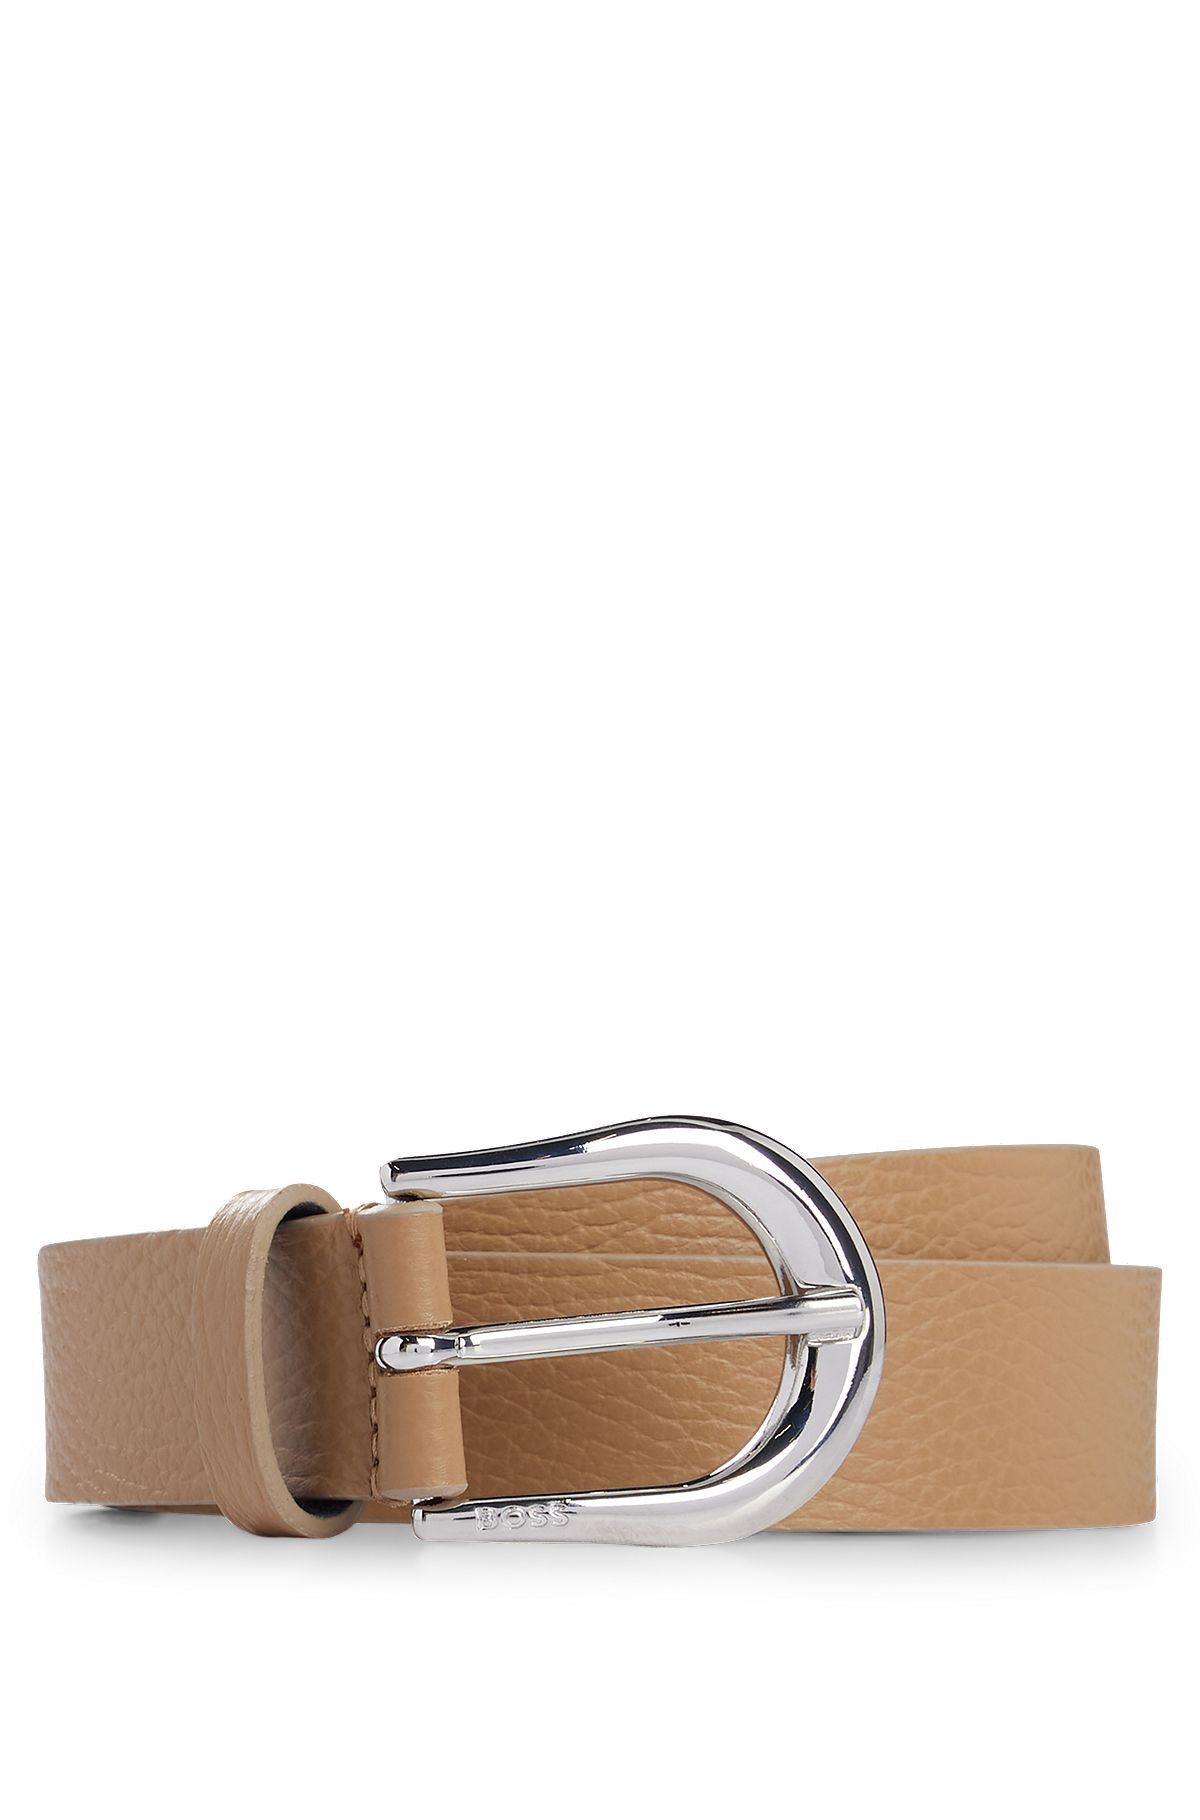 Italian-leather belt with polished silver hardware , Beige